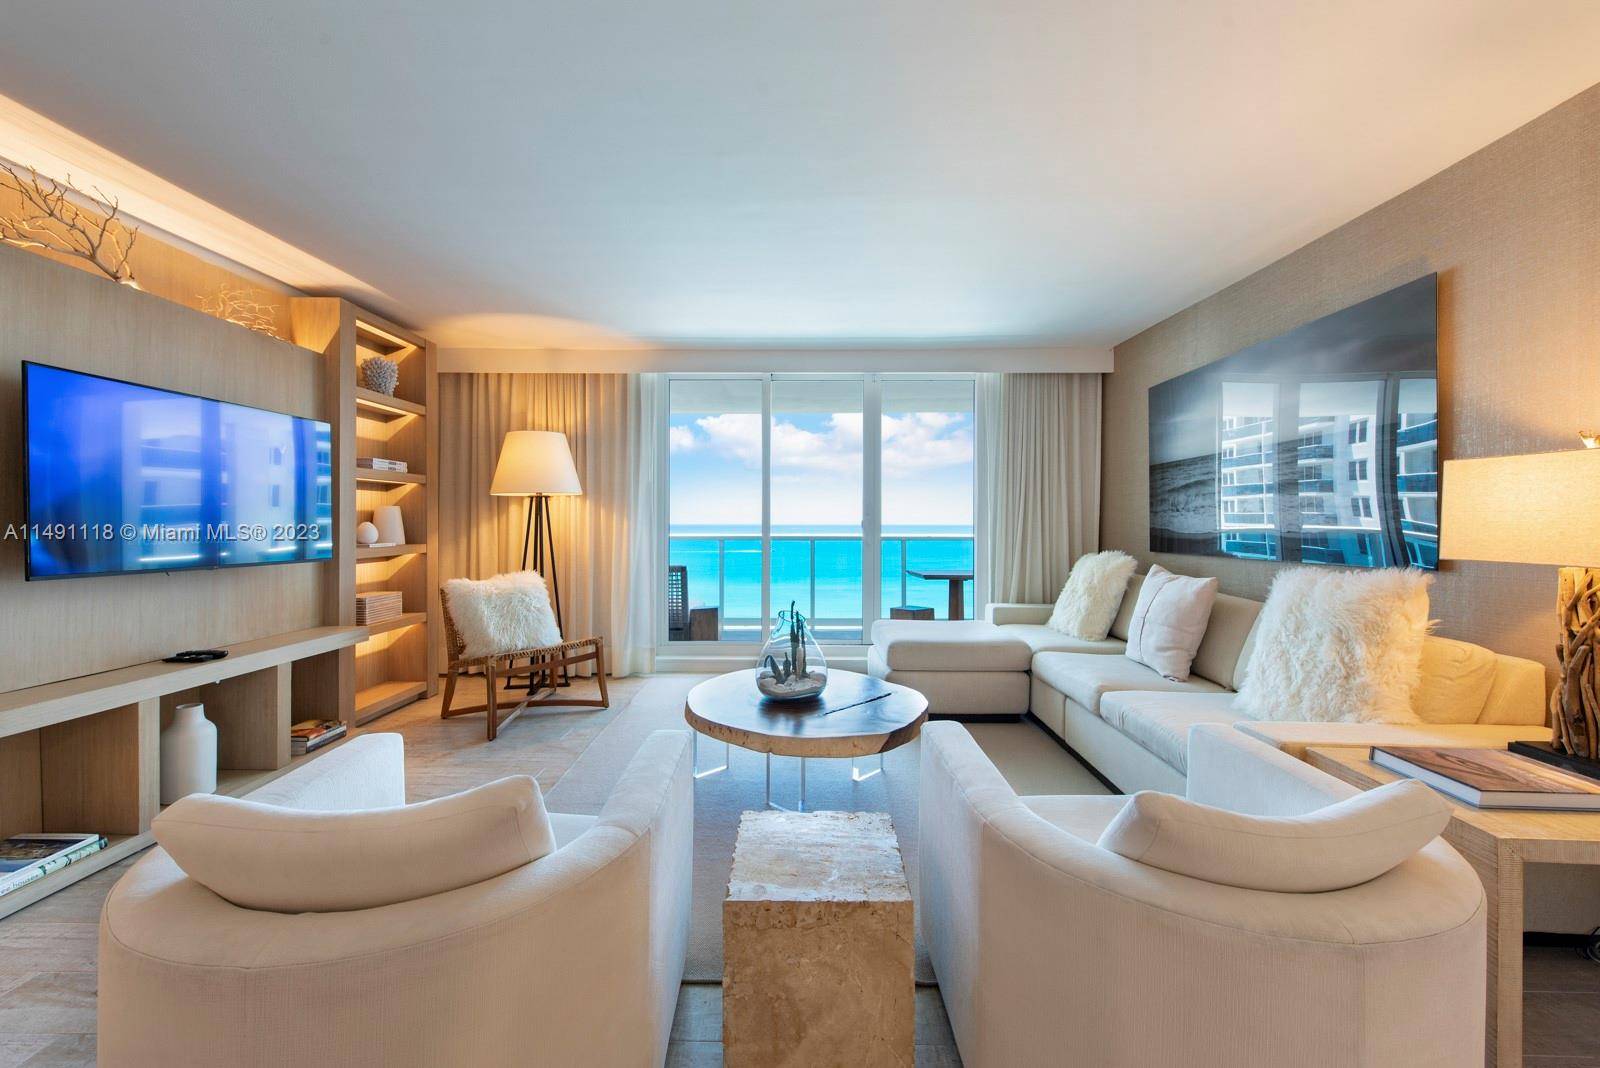 Unique 3 3 with direct ocean views from every room.